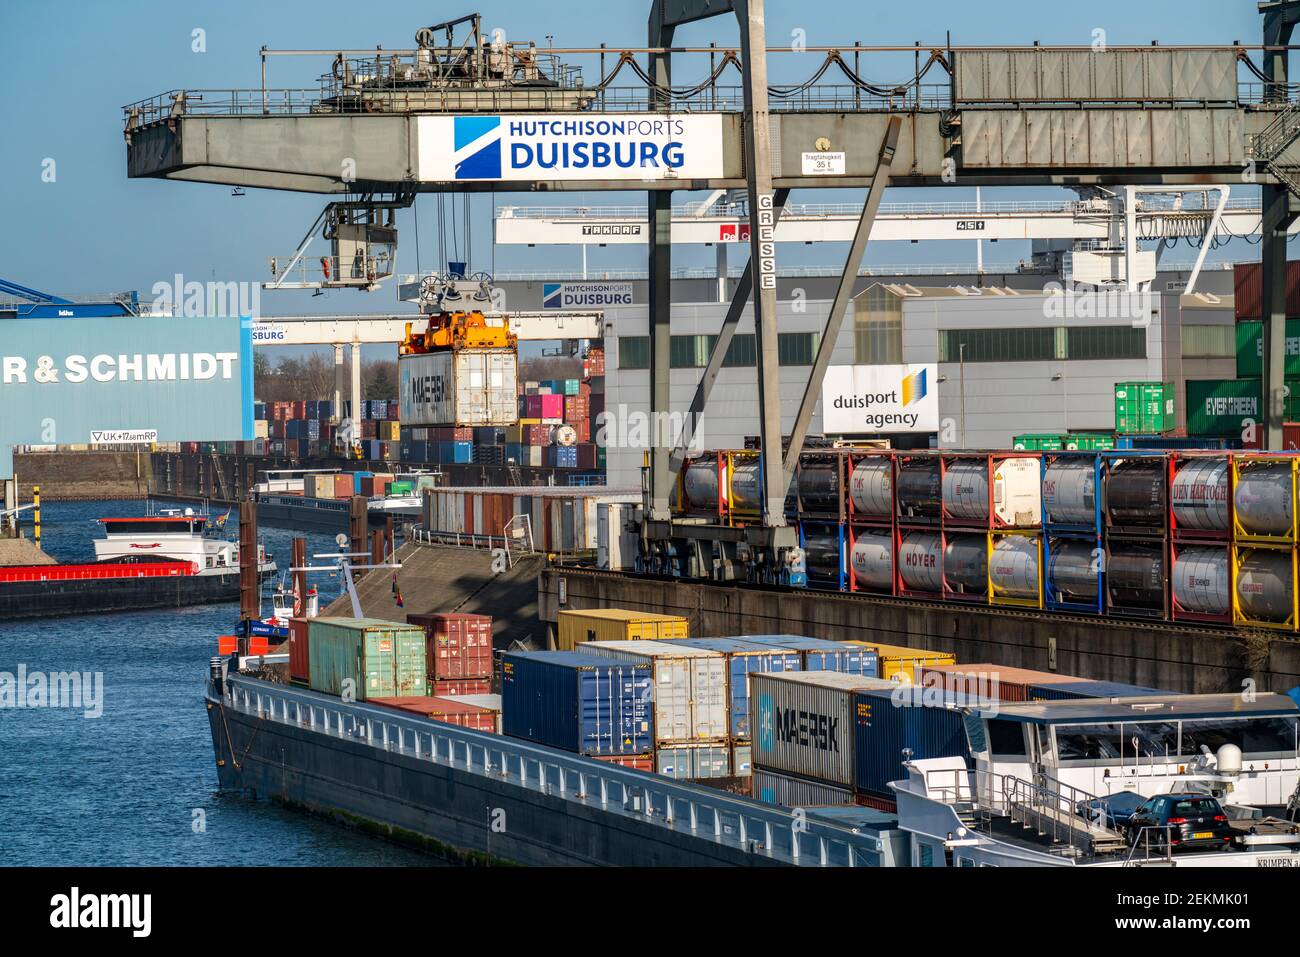 Port of Duisburg Ruhrort, container cargo ship being loaded and unloaded at DeCeTe, Duisburg Container Terminal, Duisport, Duisburger Hafen AG, Duisbu Stock Photo